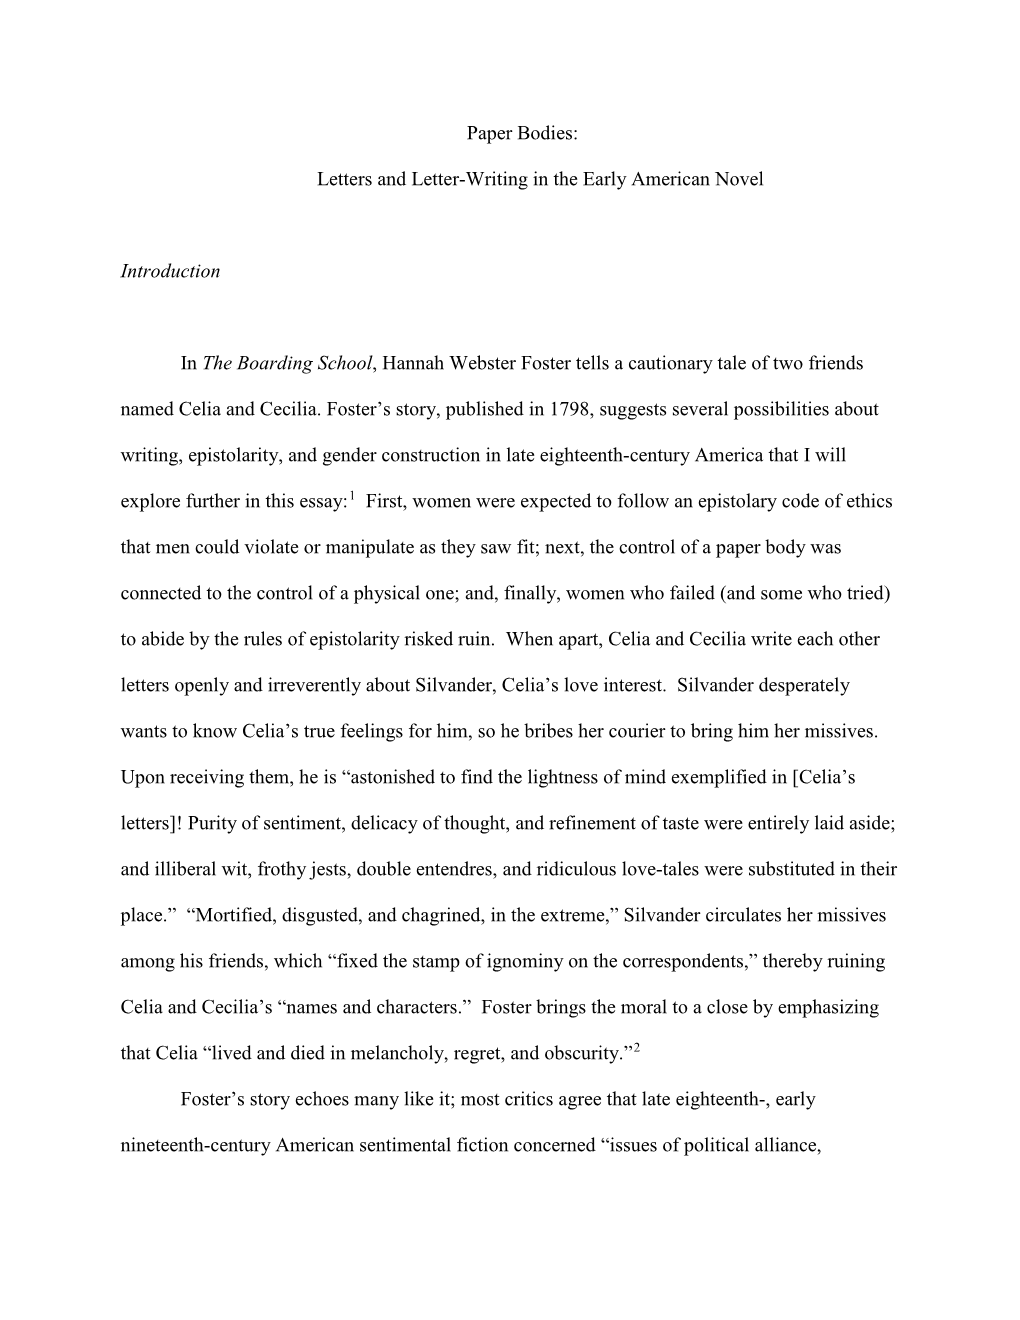 Paper Bodies: Letters and Letter-Writing in the Early American Novel Introduction in the Boarding School, Hannah Webster Foster